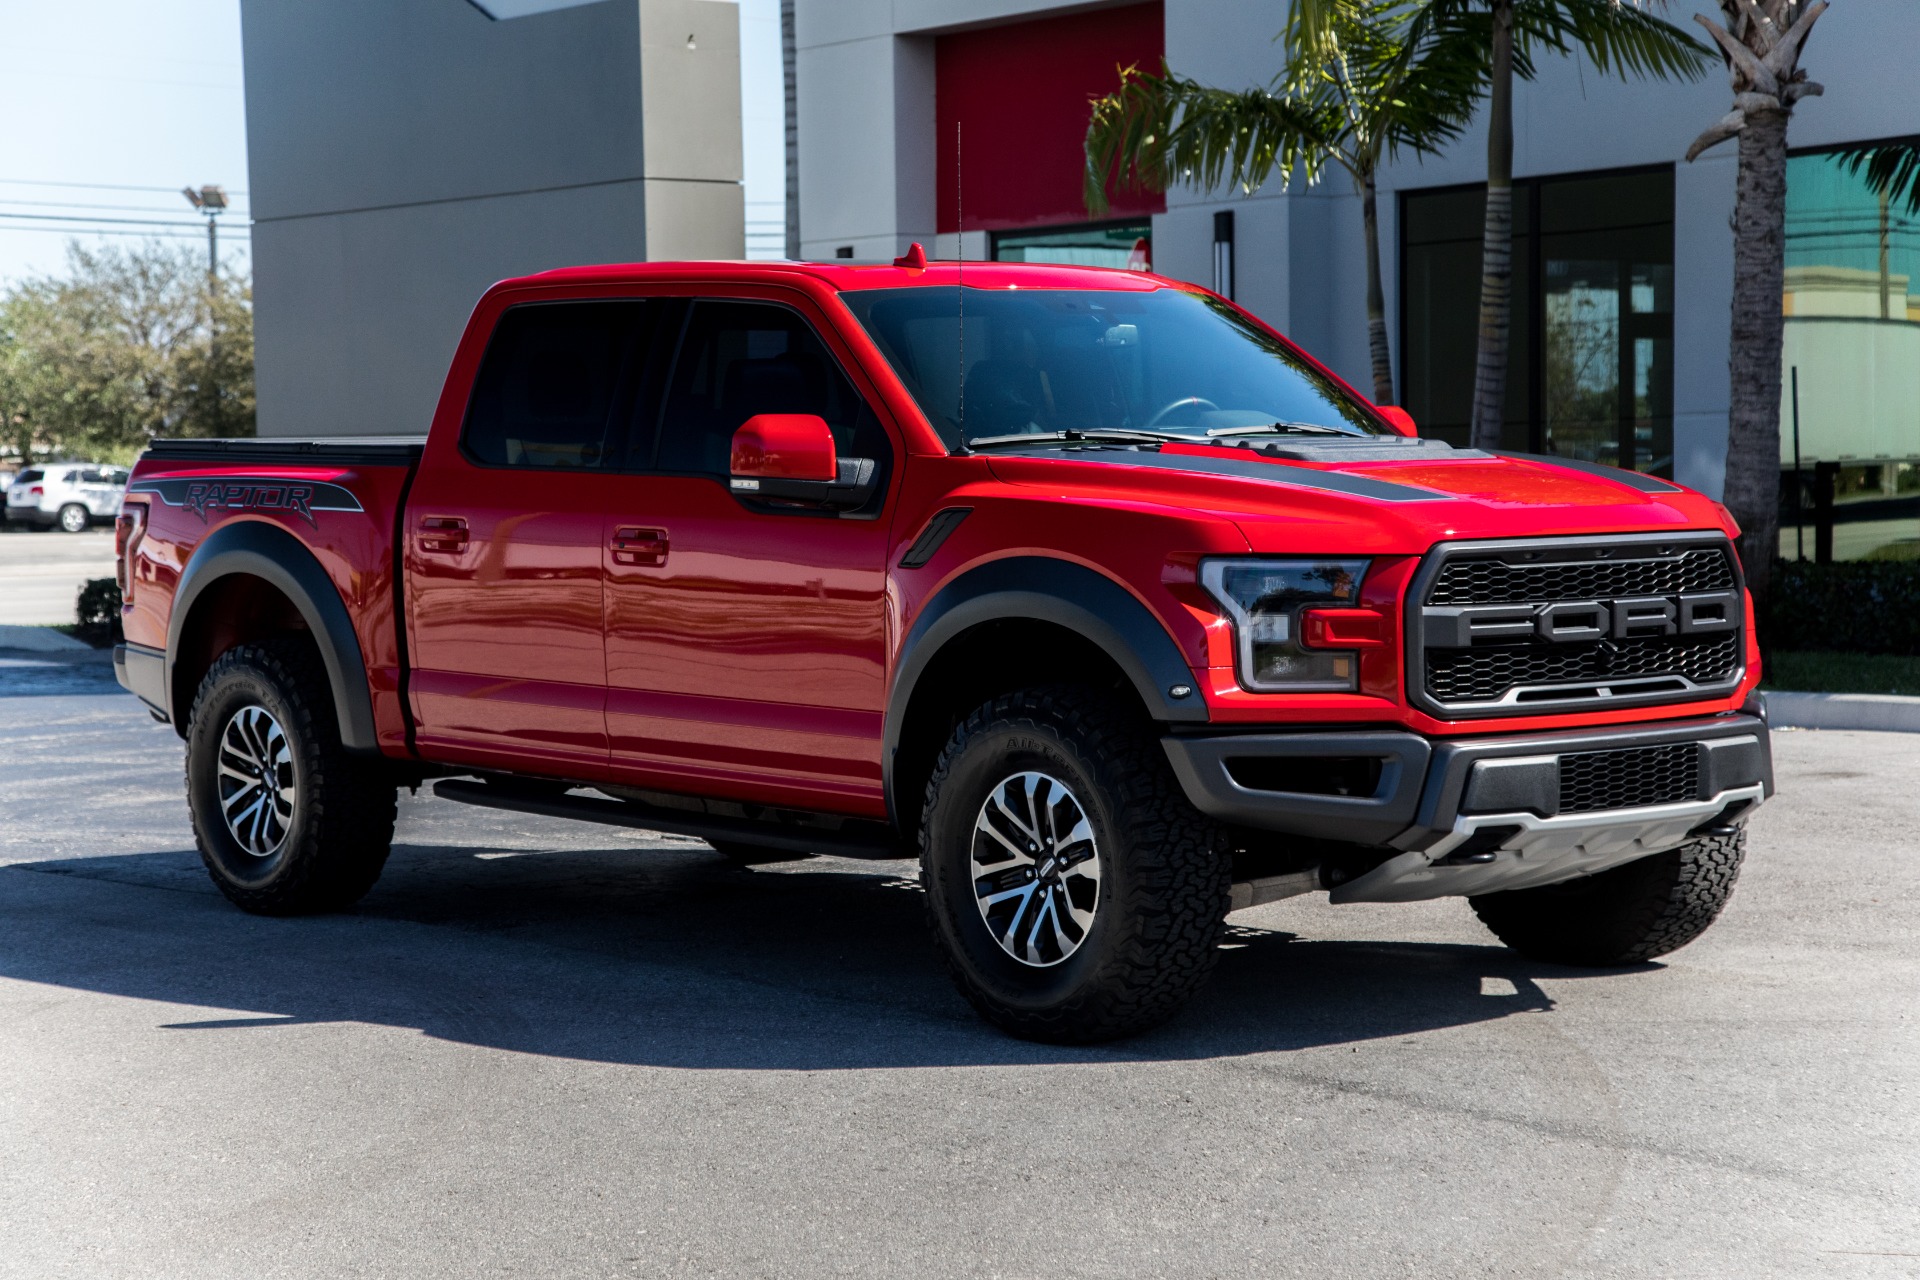 Used 2019 Ford F150 Raptor For Sale (66,900) Marino